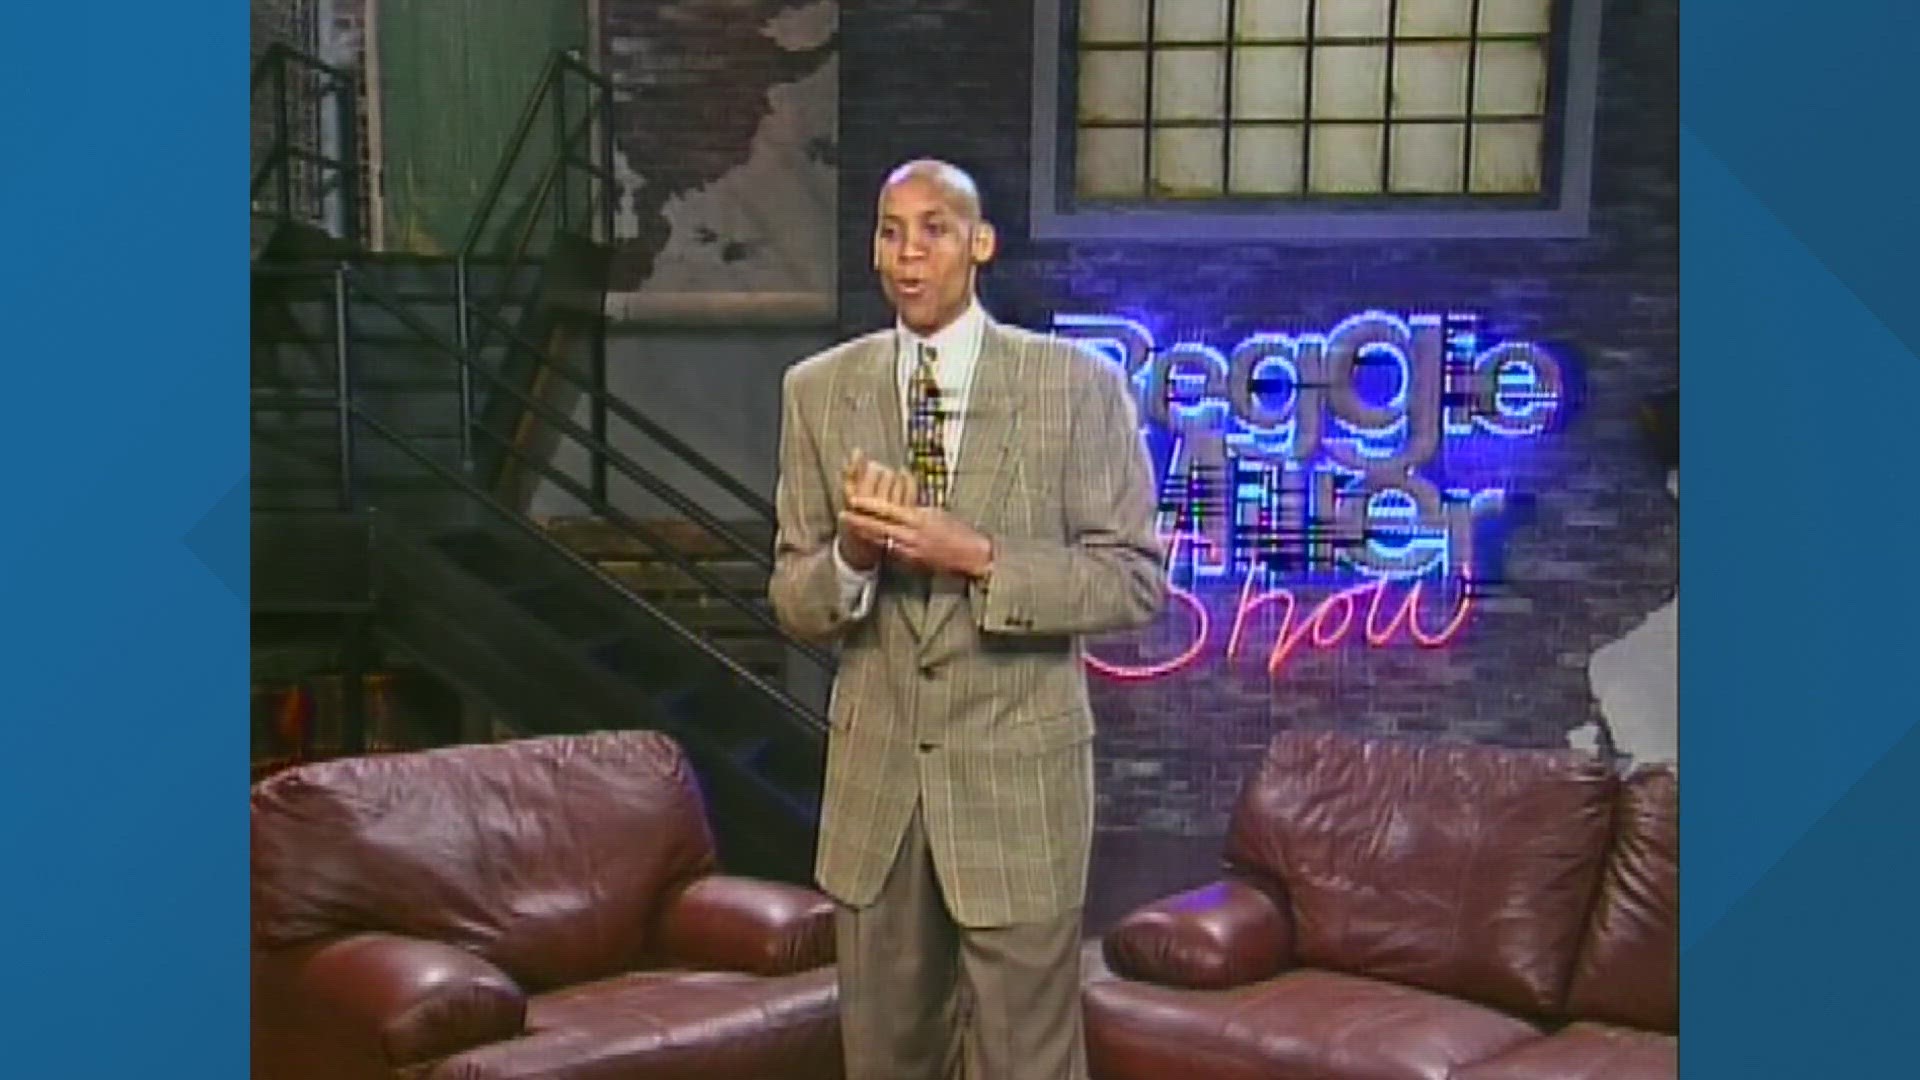 Reggie Miller and Dave Calabro reflect on Reggie's old weekly show from the 90s called 'The Reggie Miller Show'